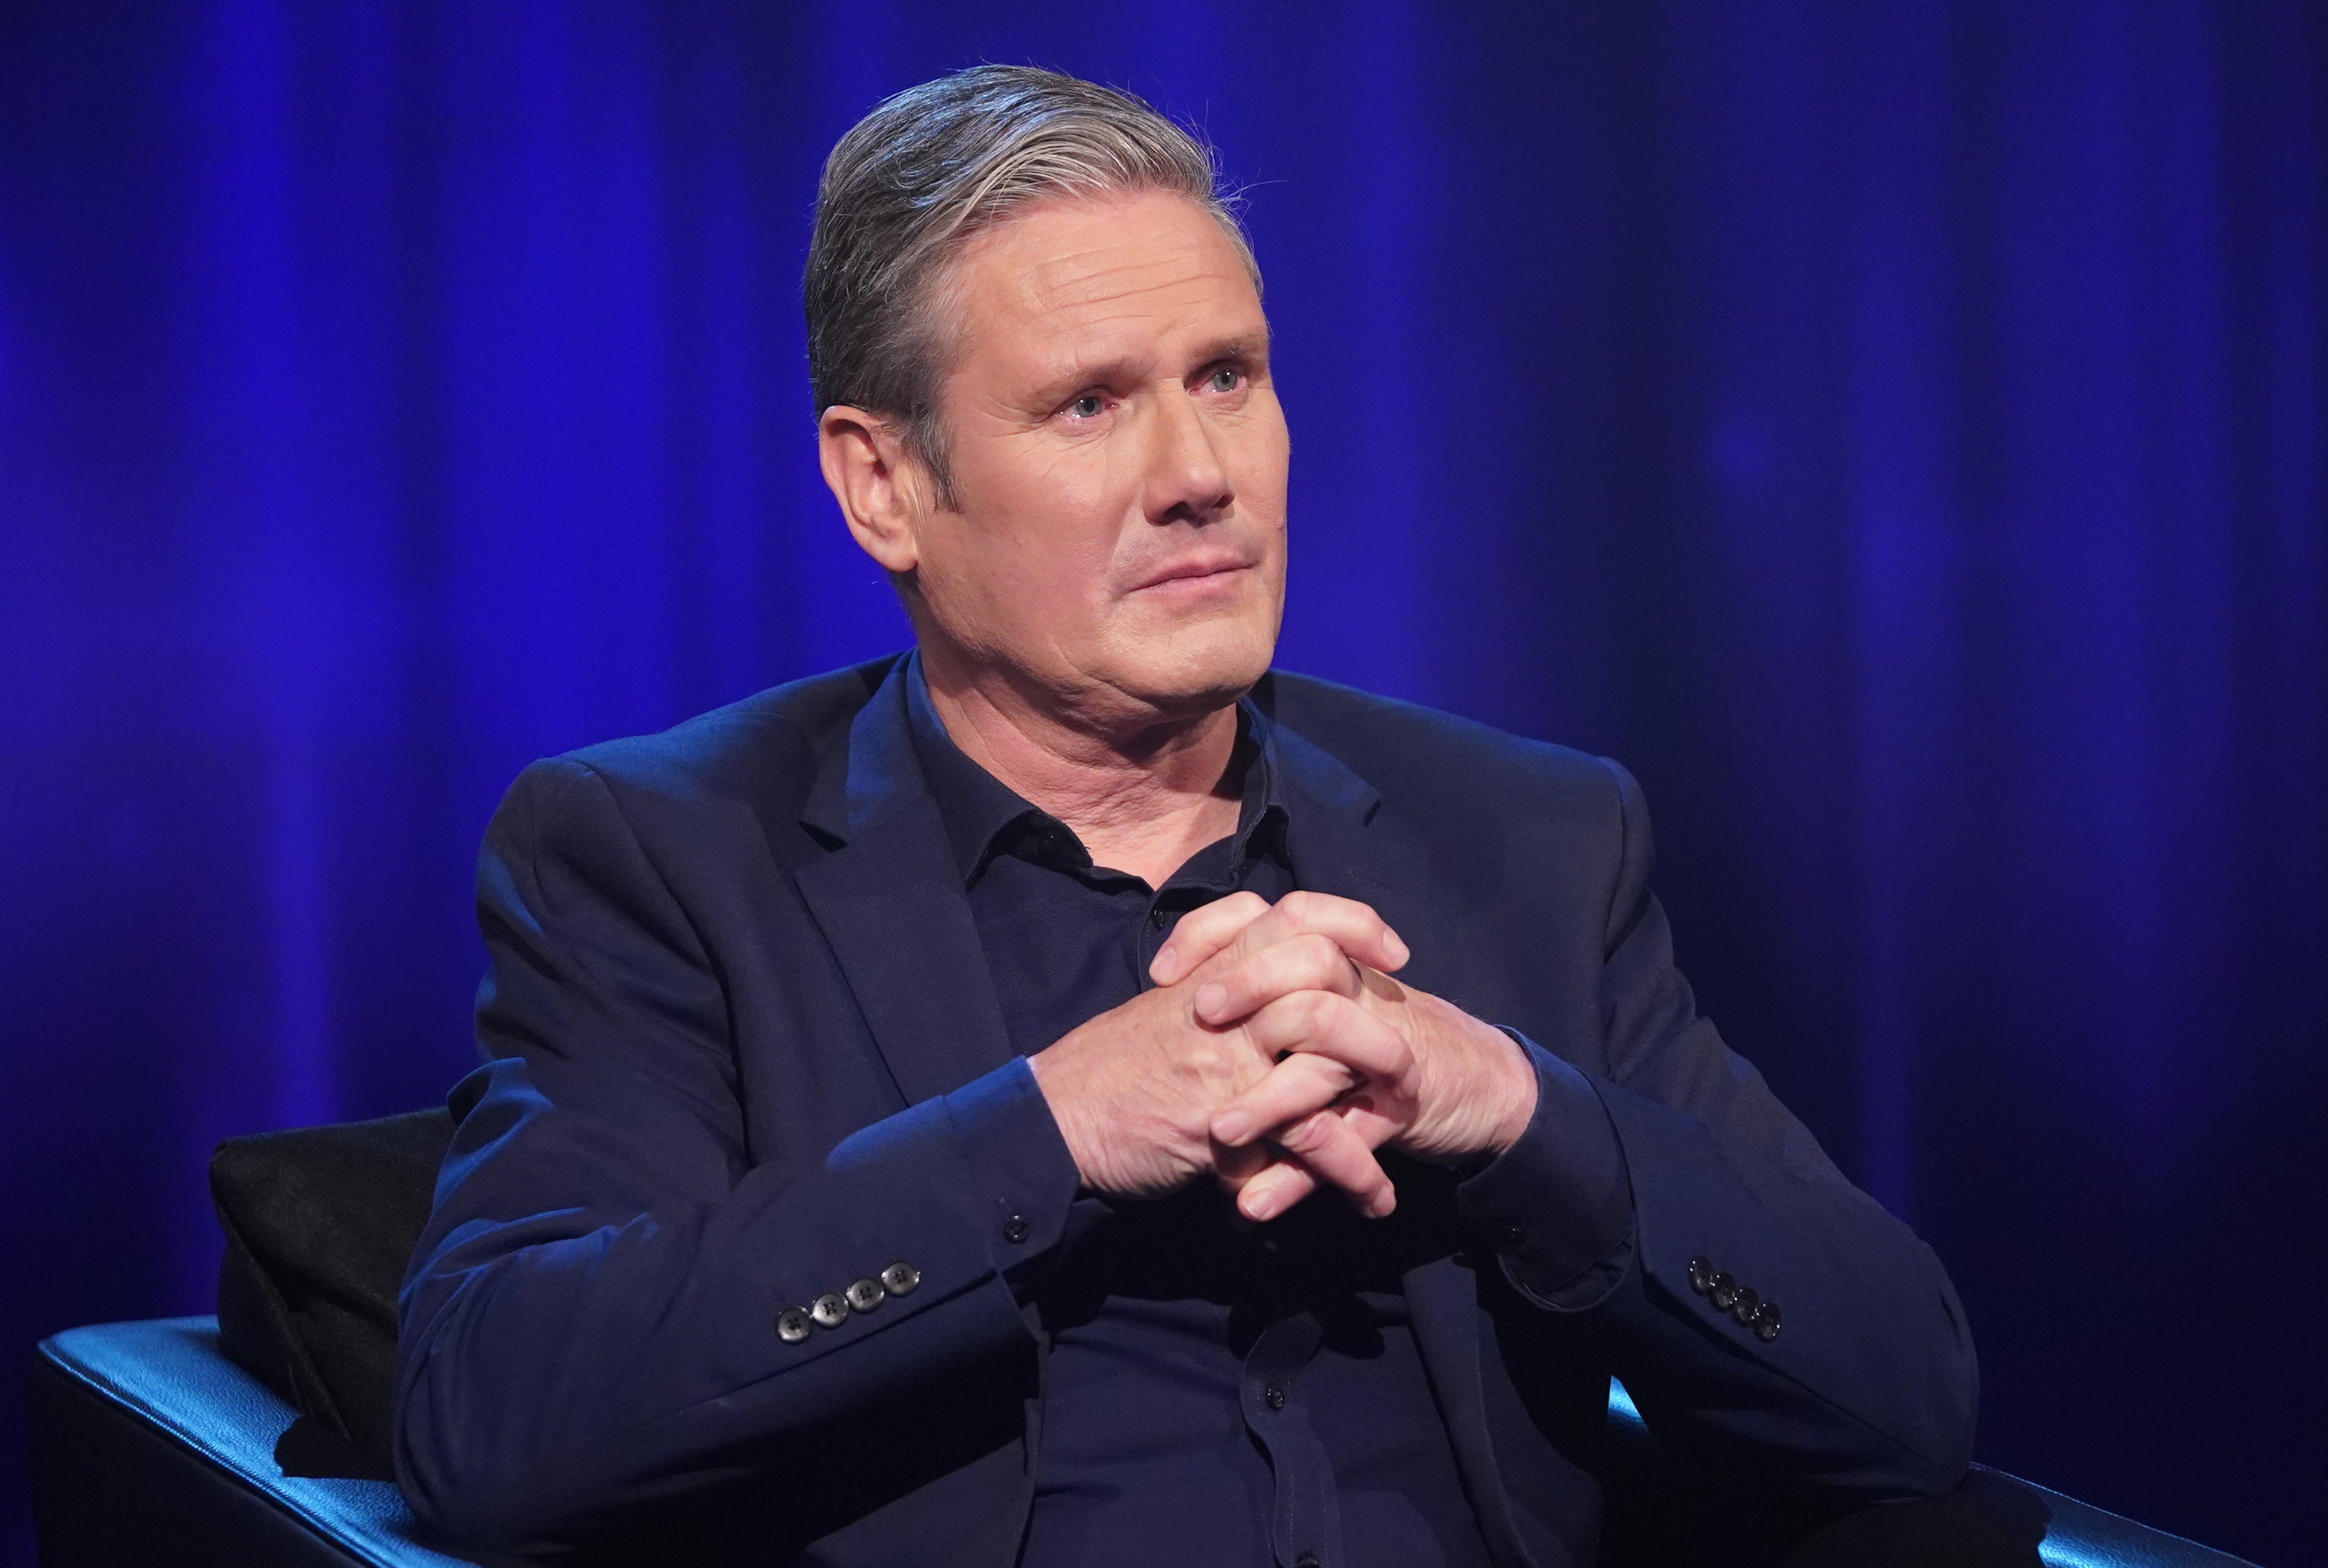 Sir Keir Starmer became slightly emotional when interviewed by Piers Morgan – as would most people